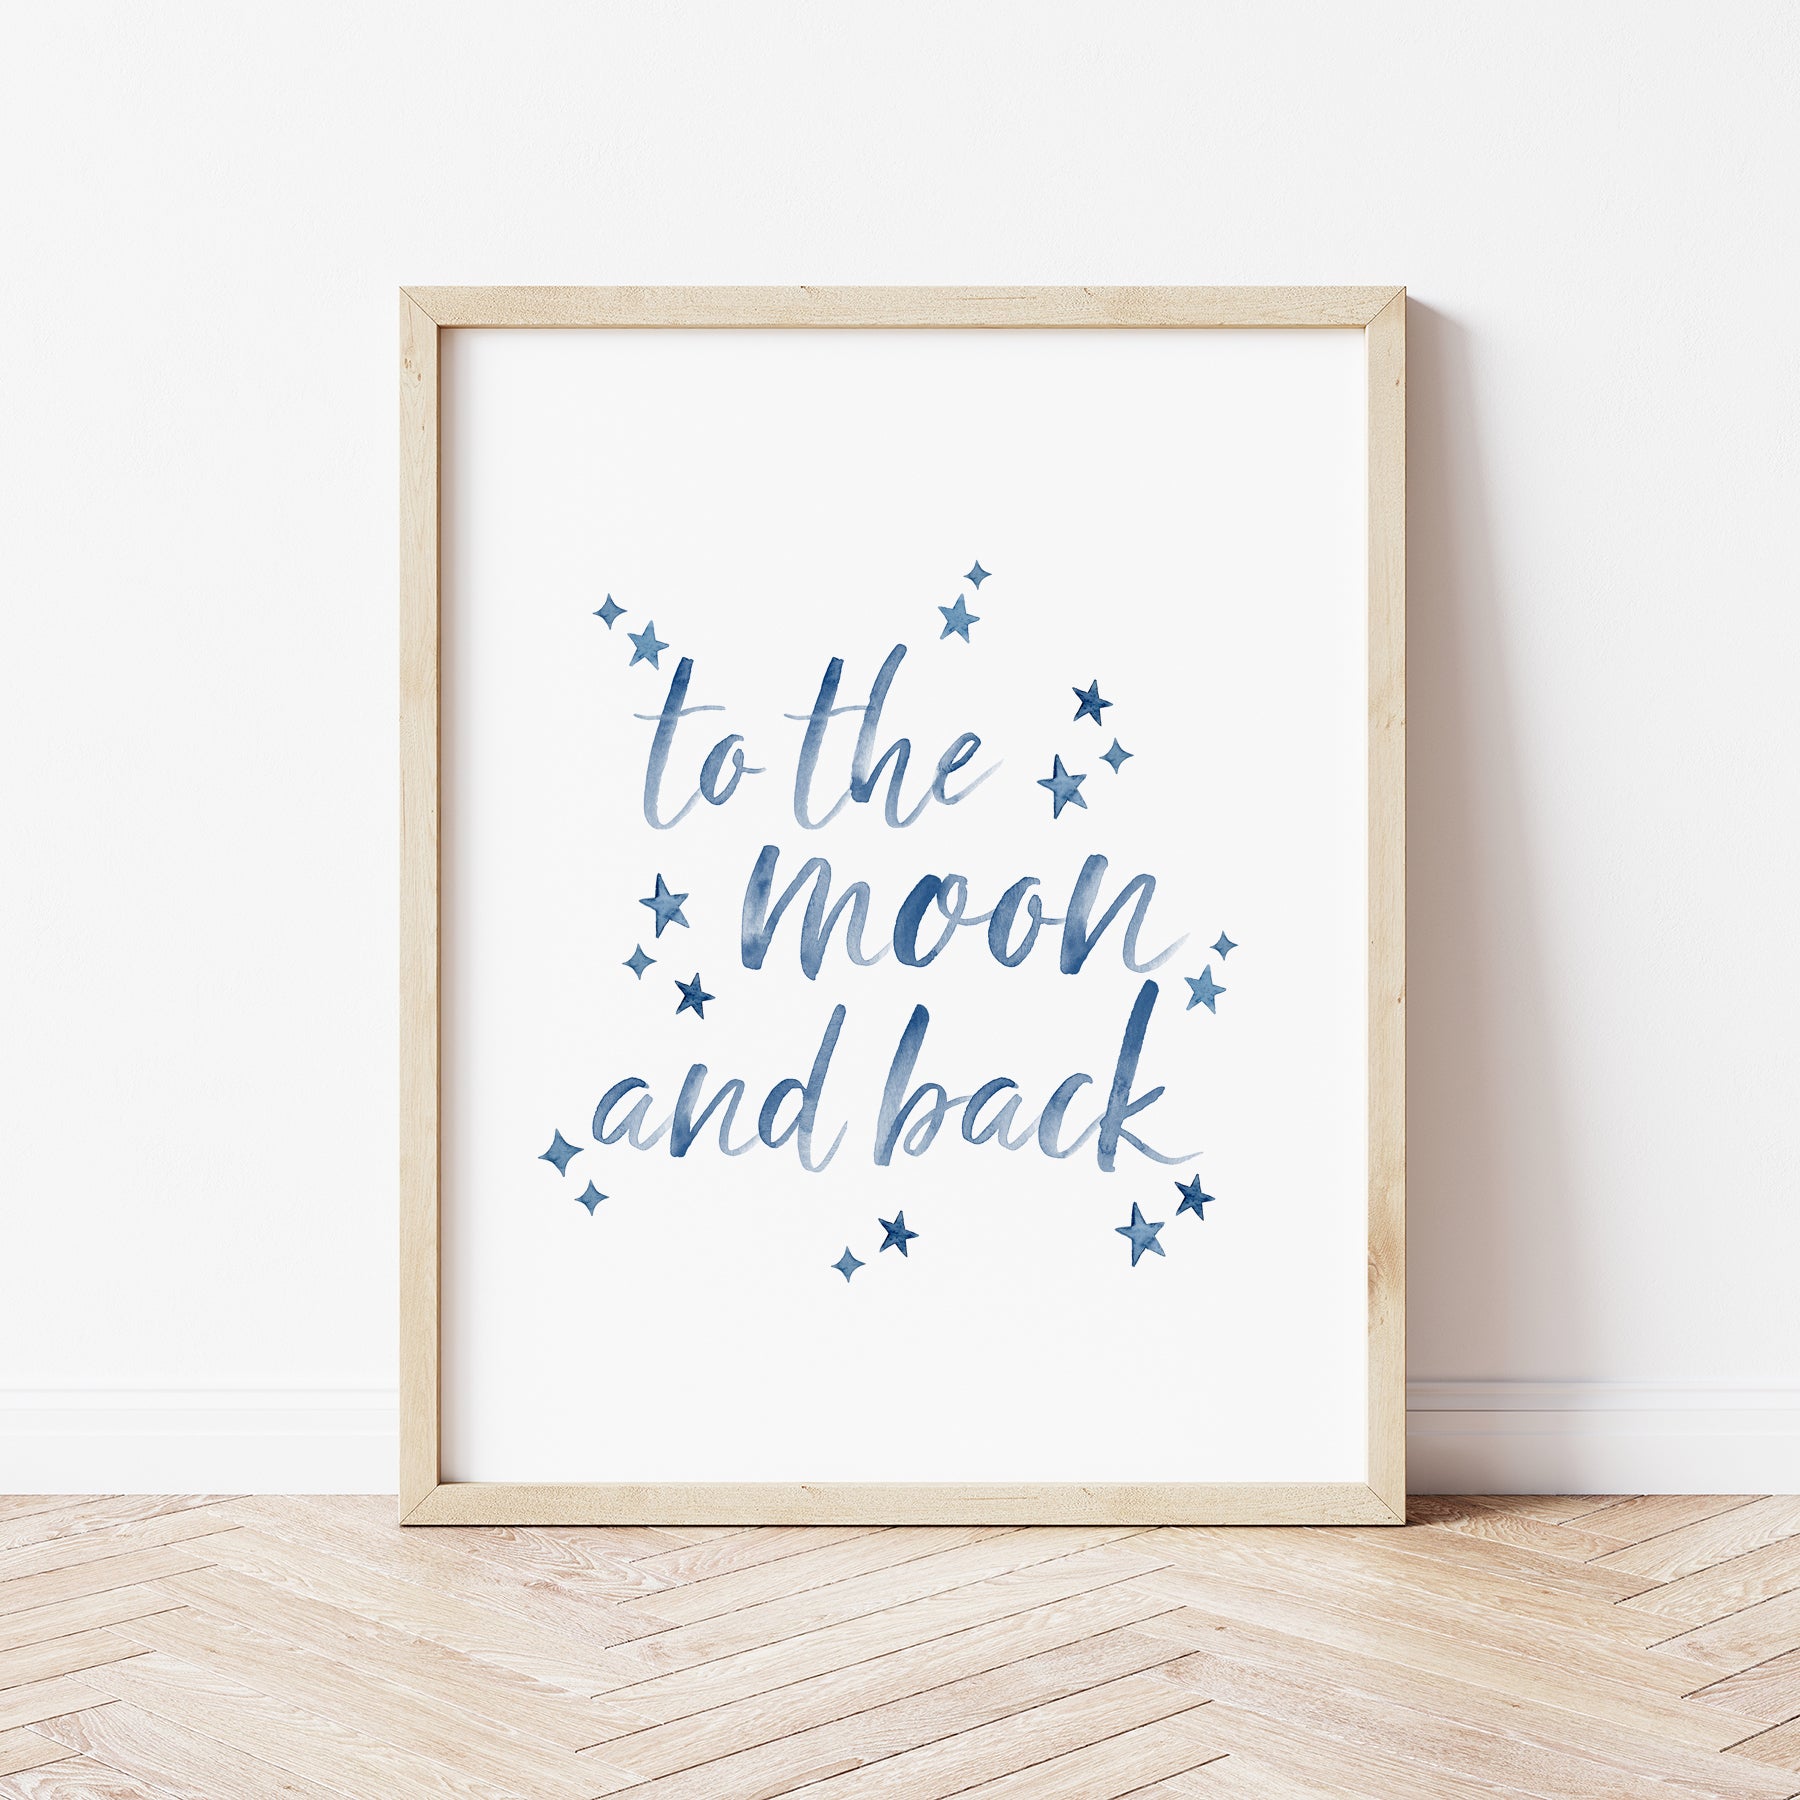 "To the moon and back" Art Print by Gert & Co